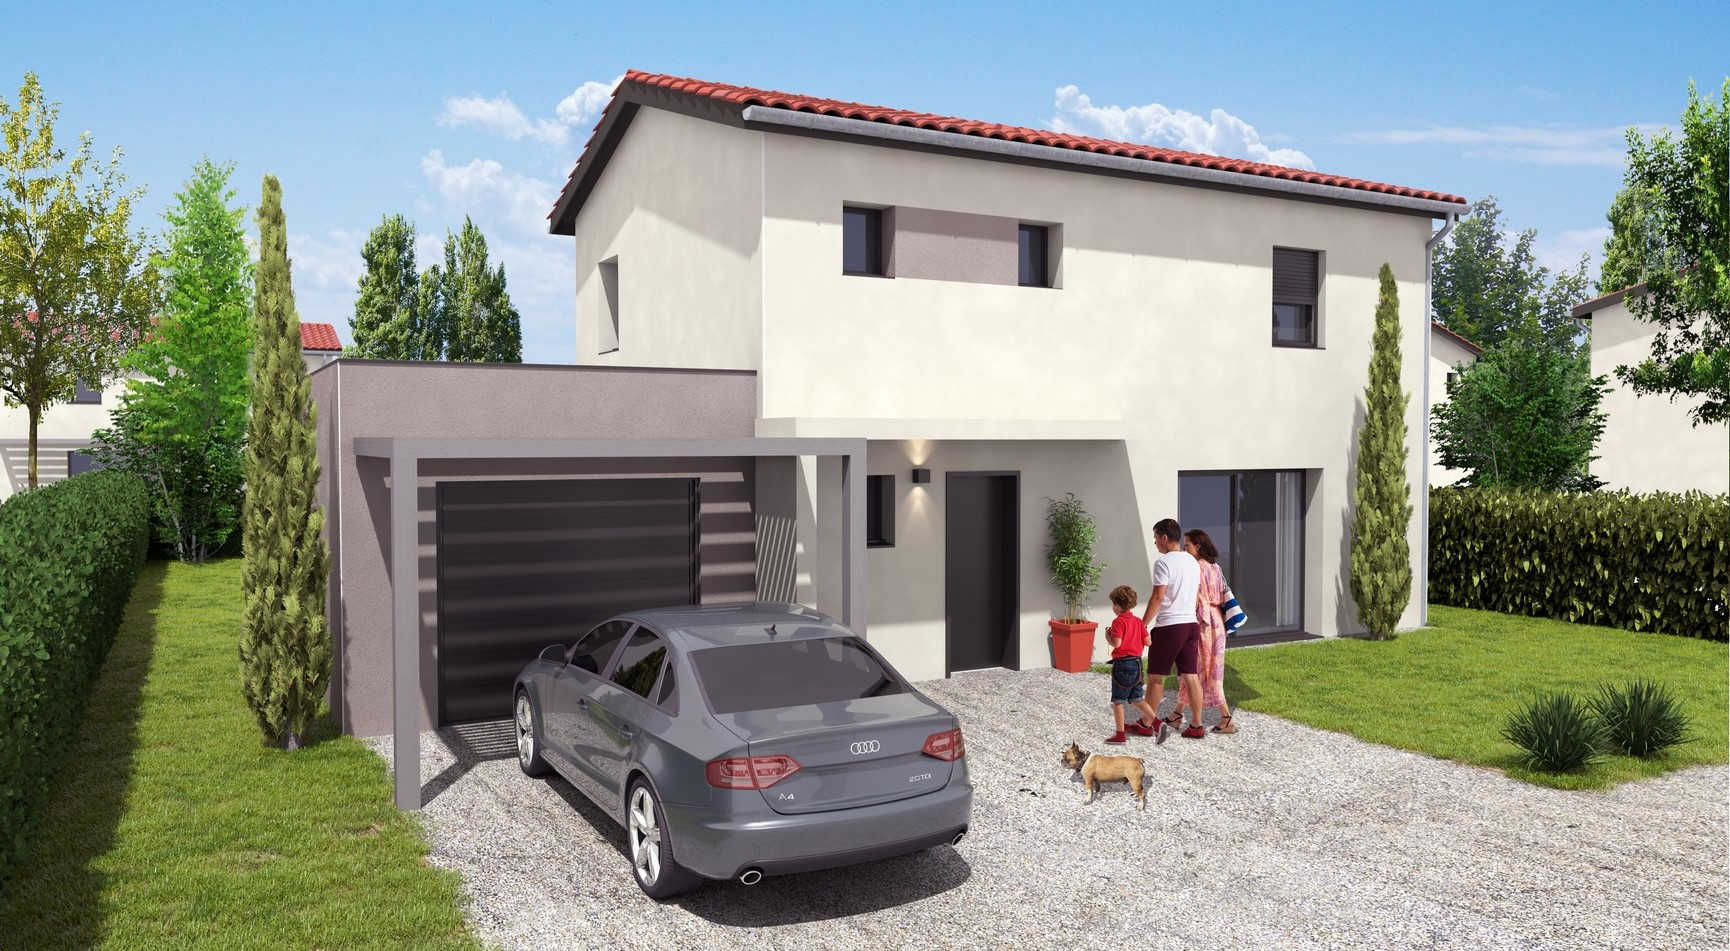 Programme immobilier EQ2 appartement à Charly(69390) 